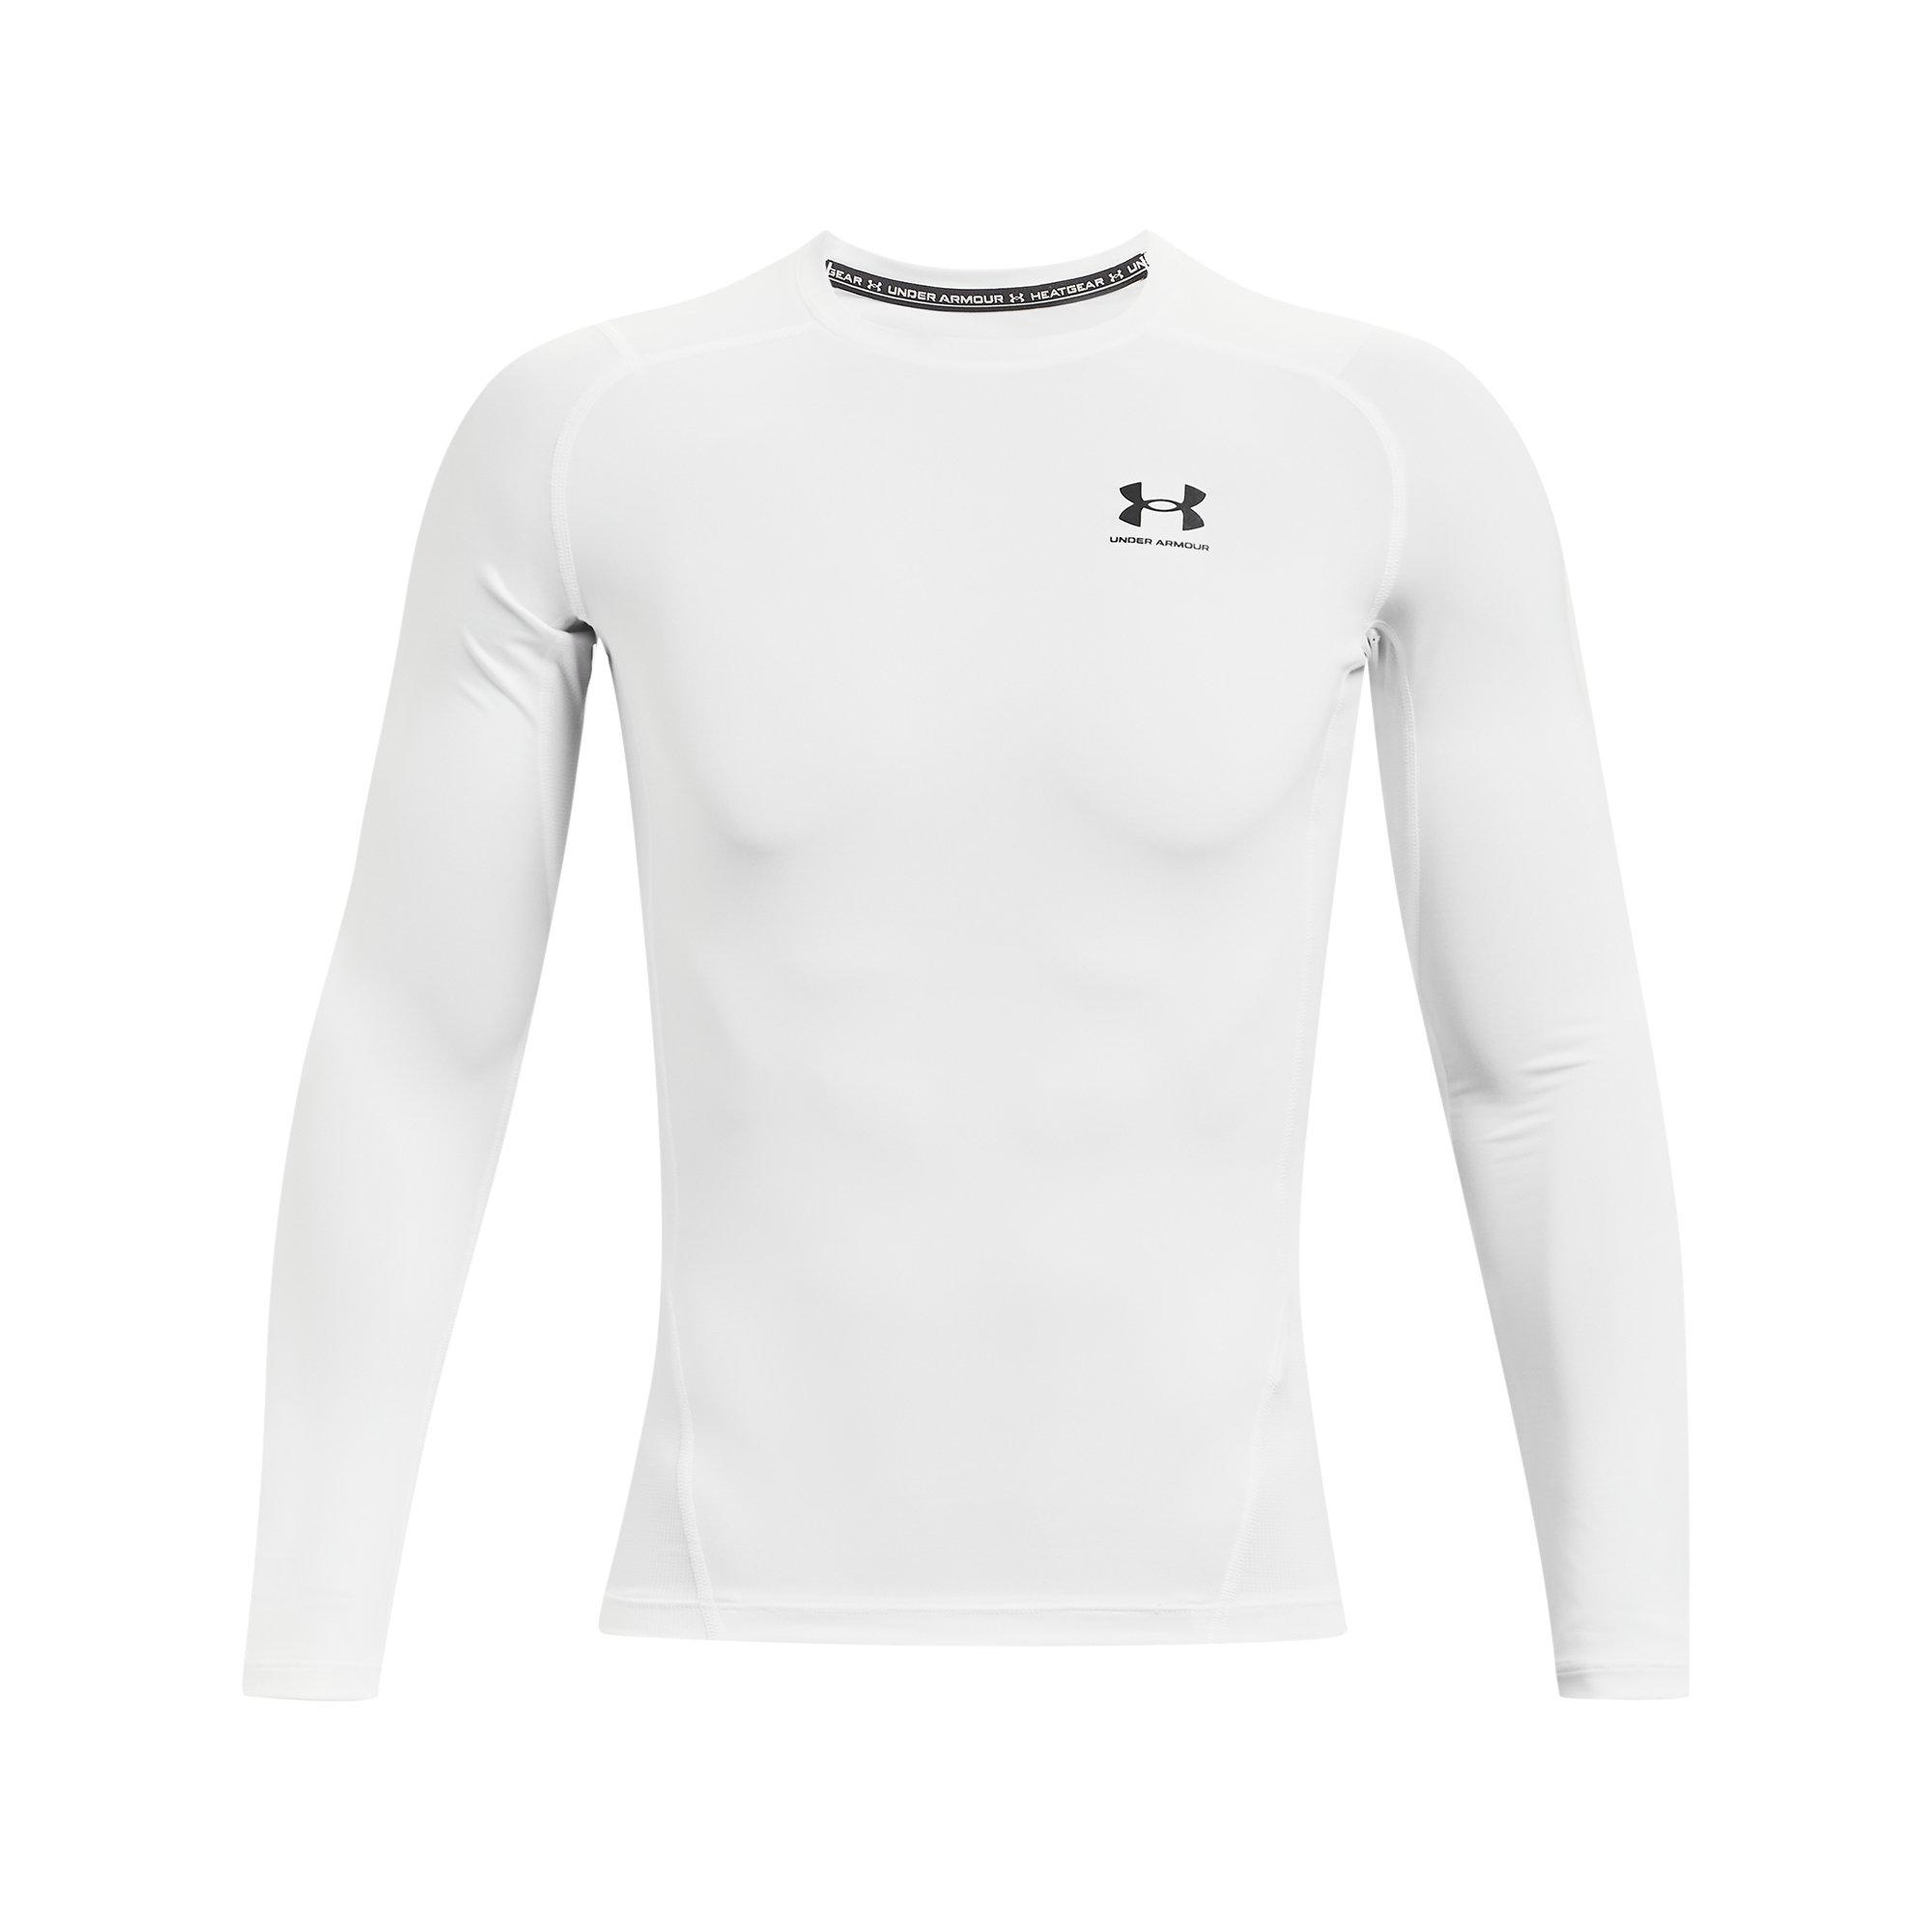 Under Armour HeatGear Mens White Long Sleeve Sports Compression Running Top 